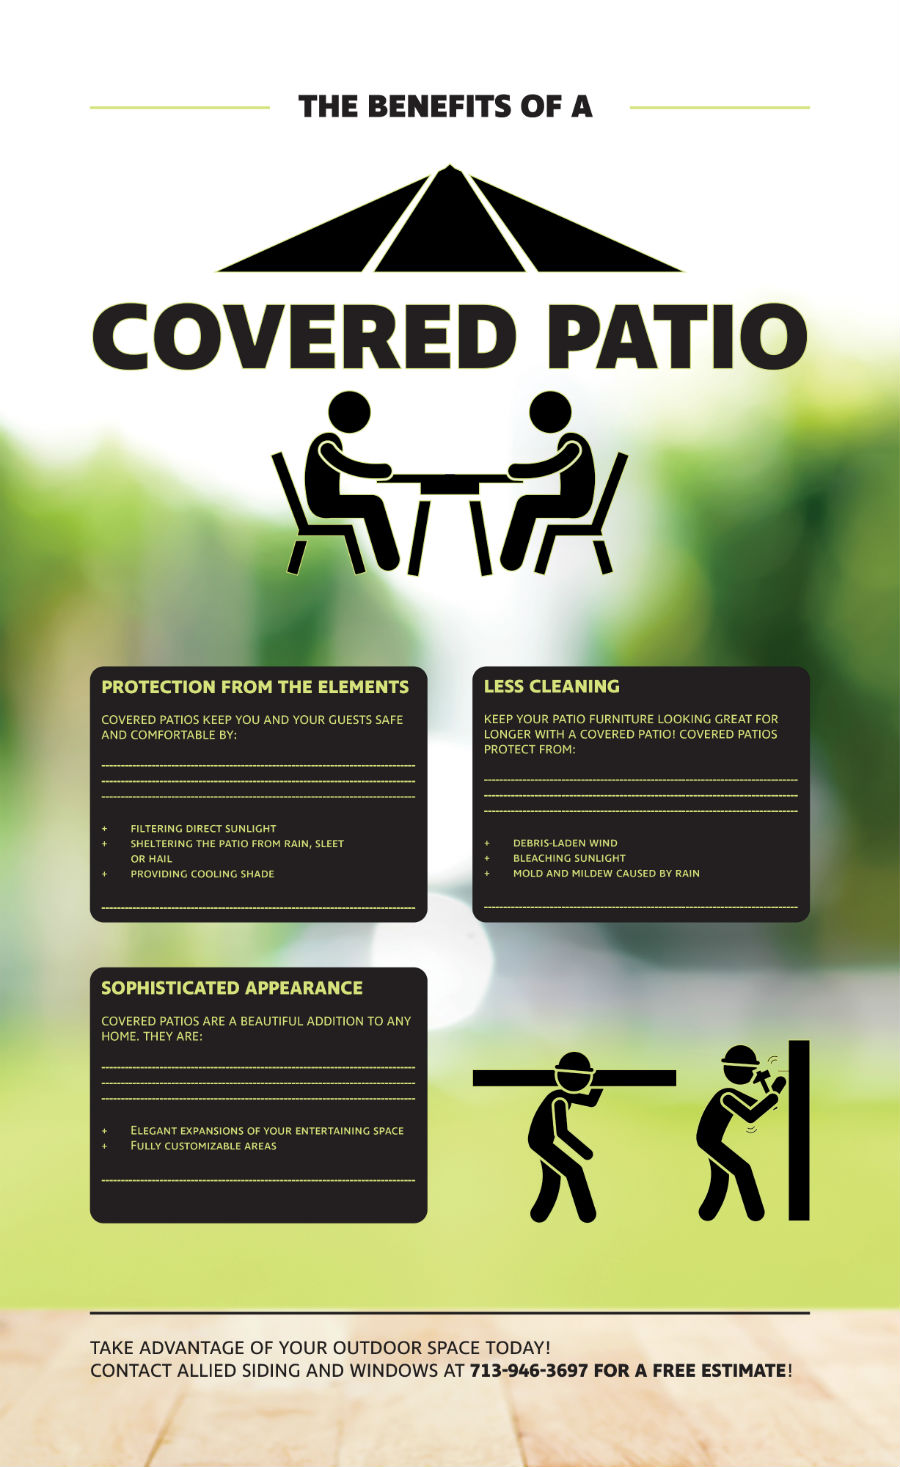 covered patio benefits